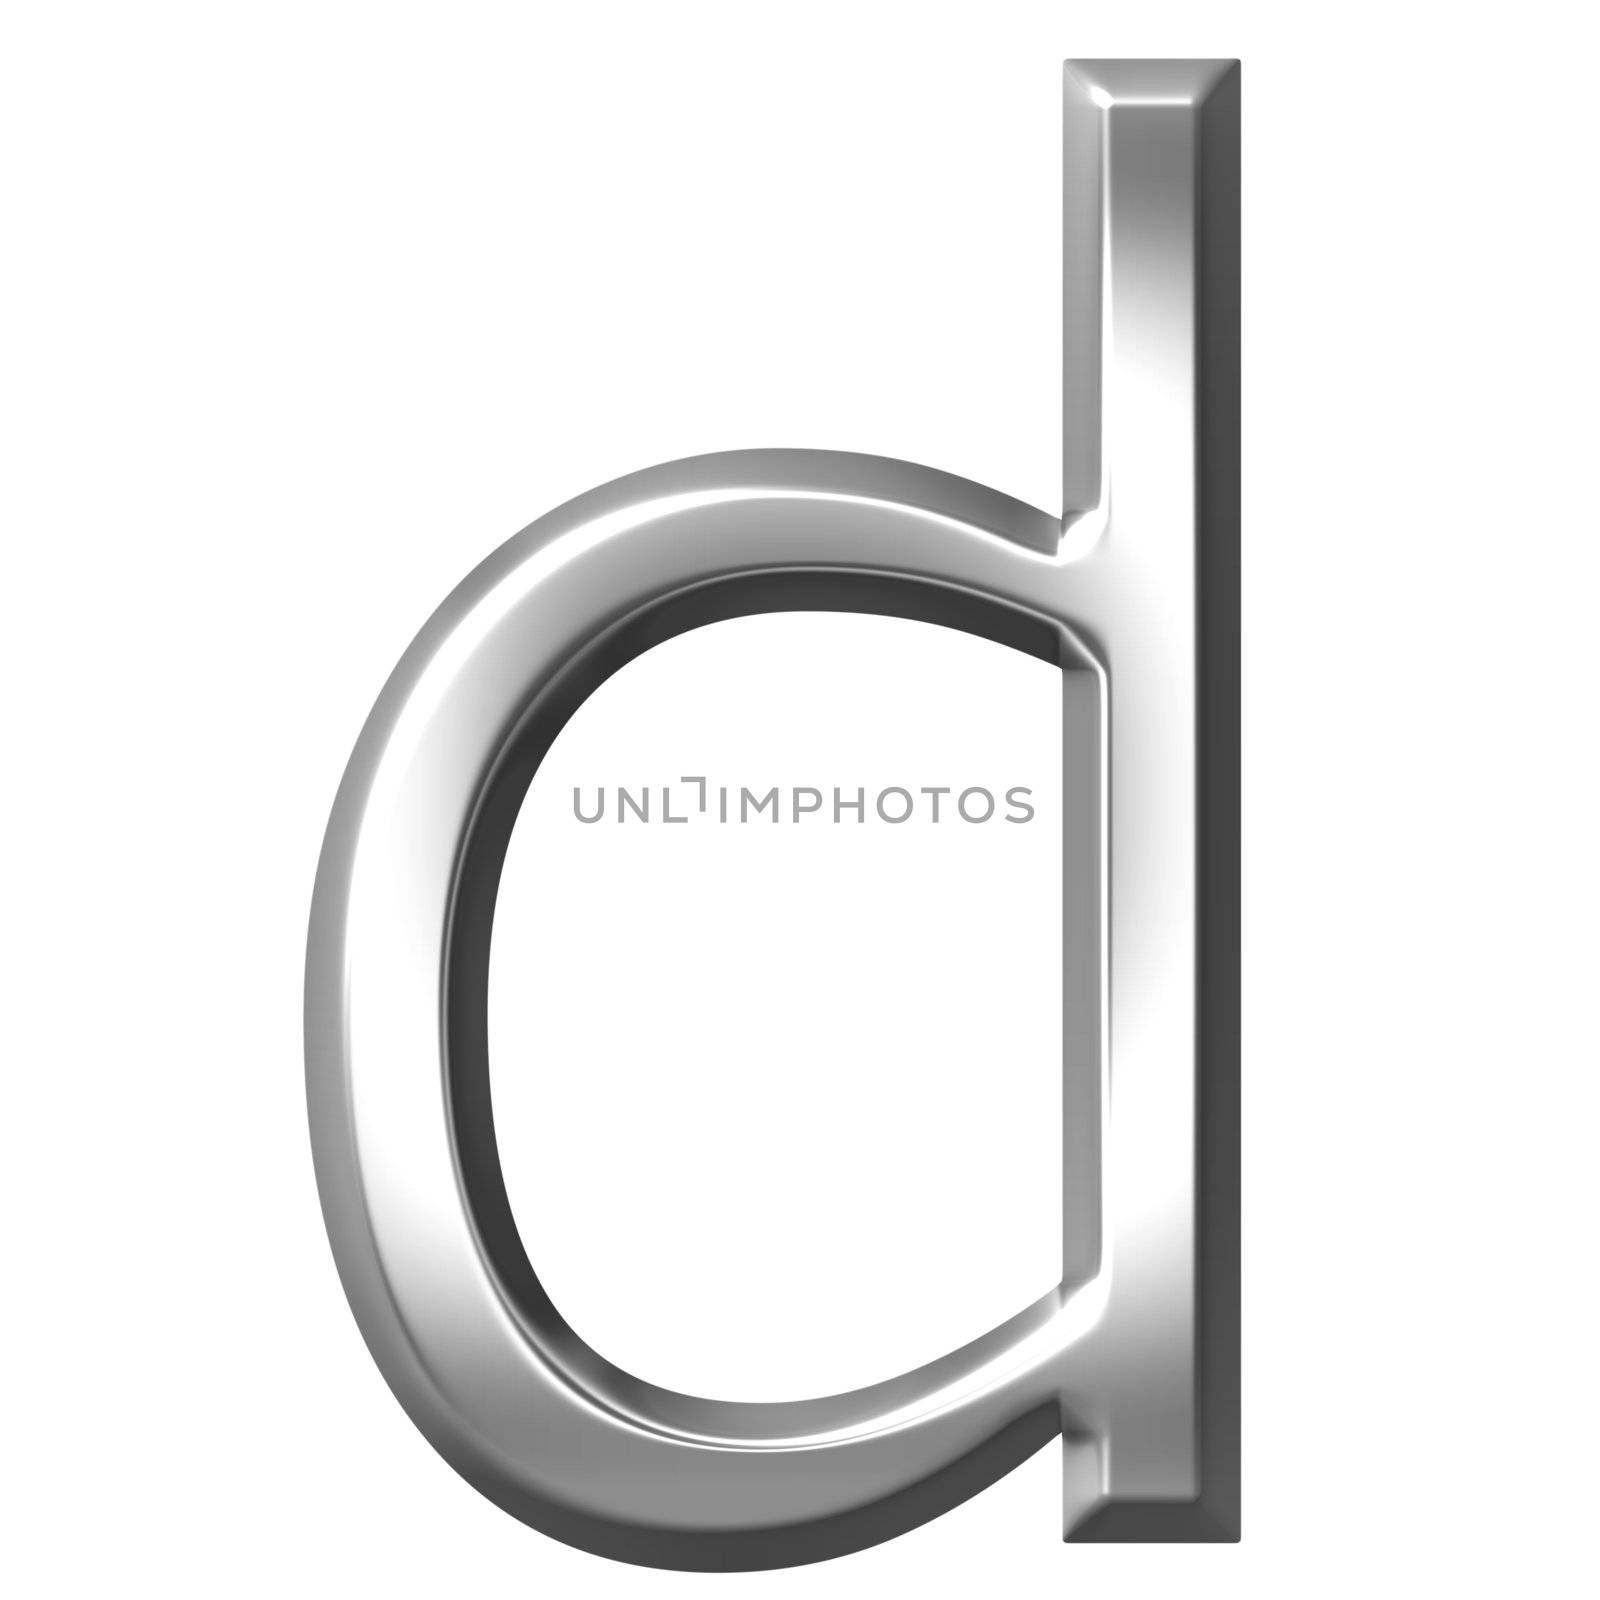 3d silver letter d isolated in white